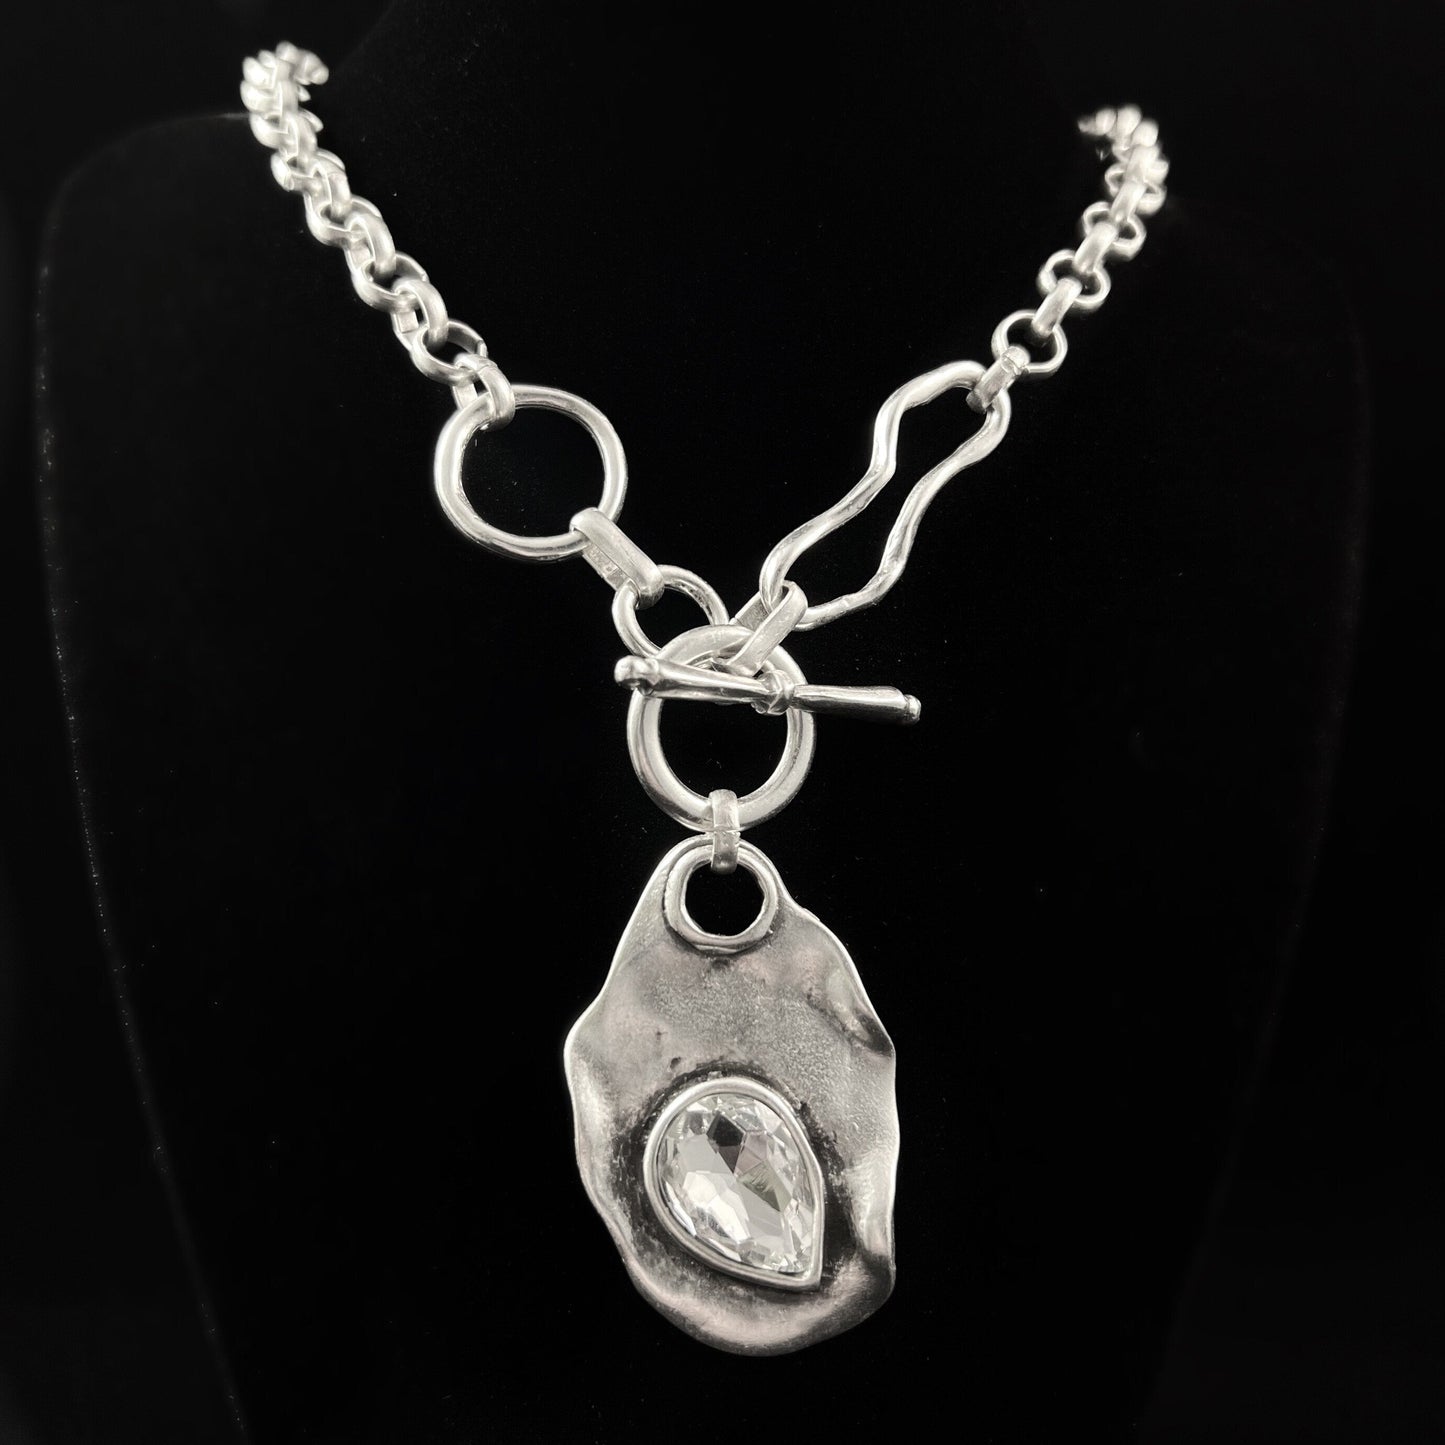 Chunky Abstract Silver Necklace with Teardrop Crystal Accent, Handmade, Nickel Free